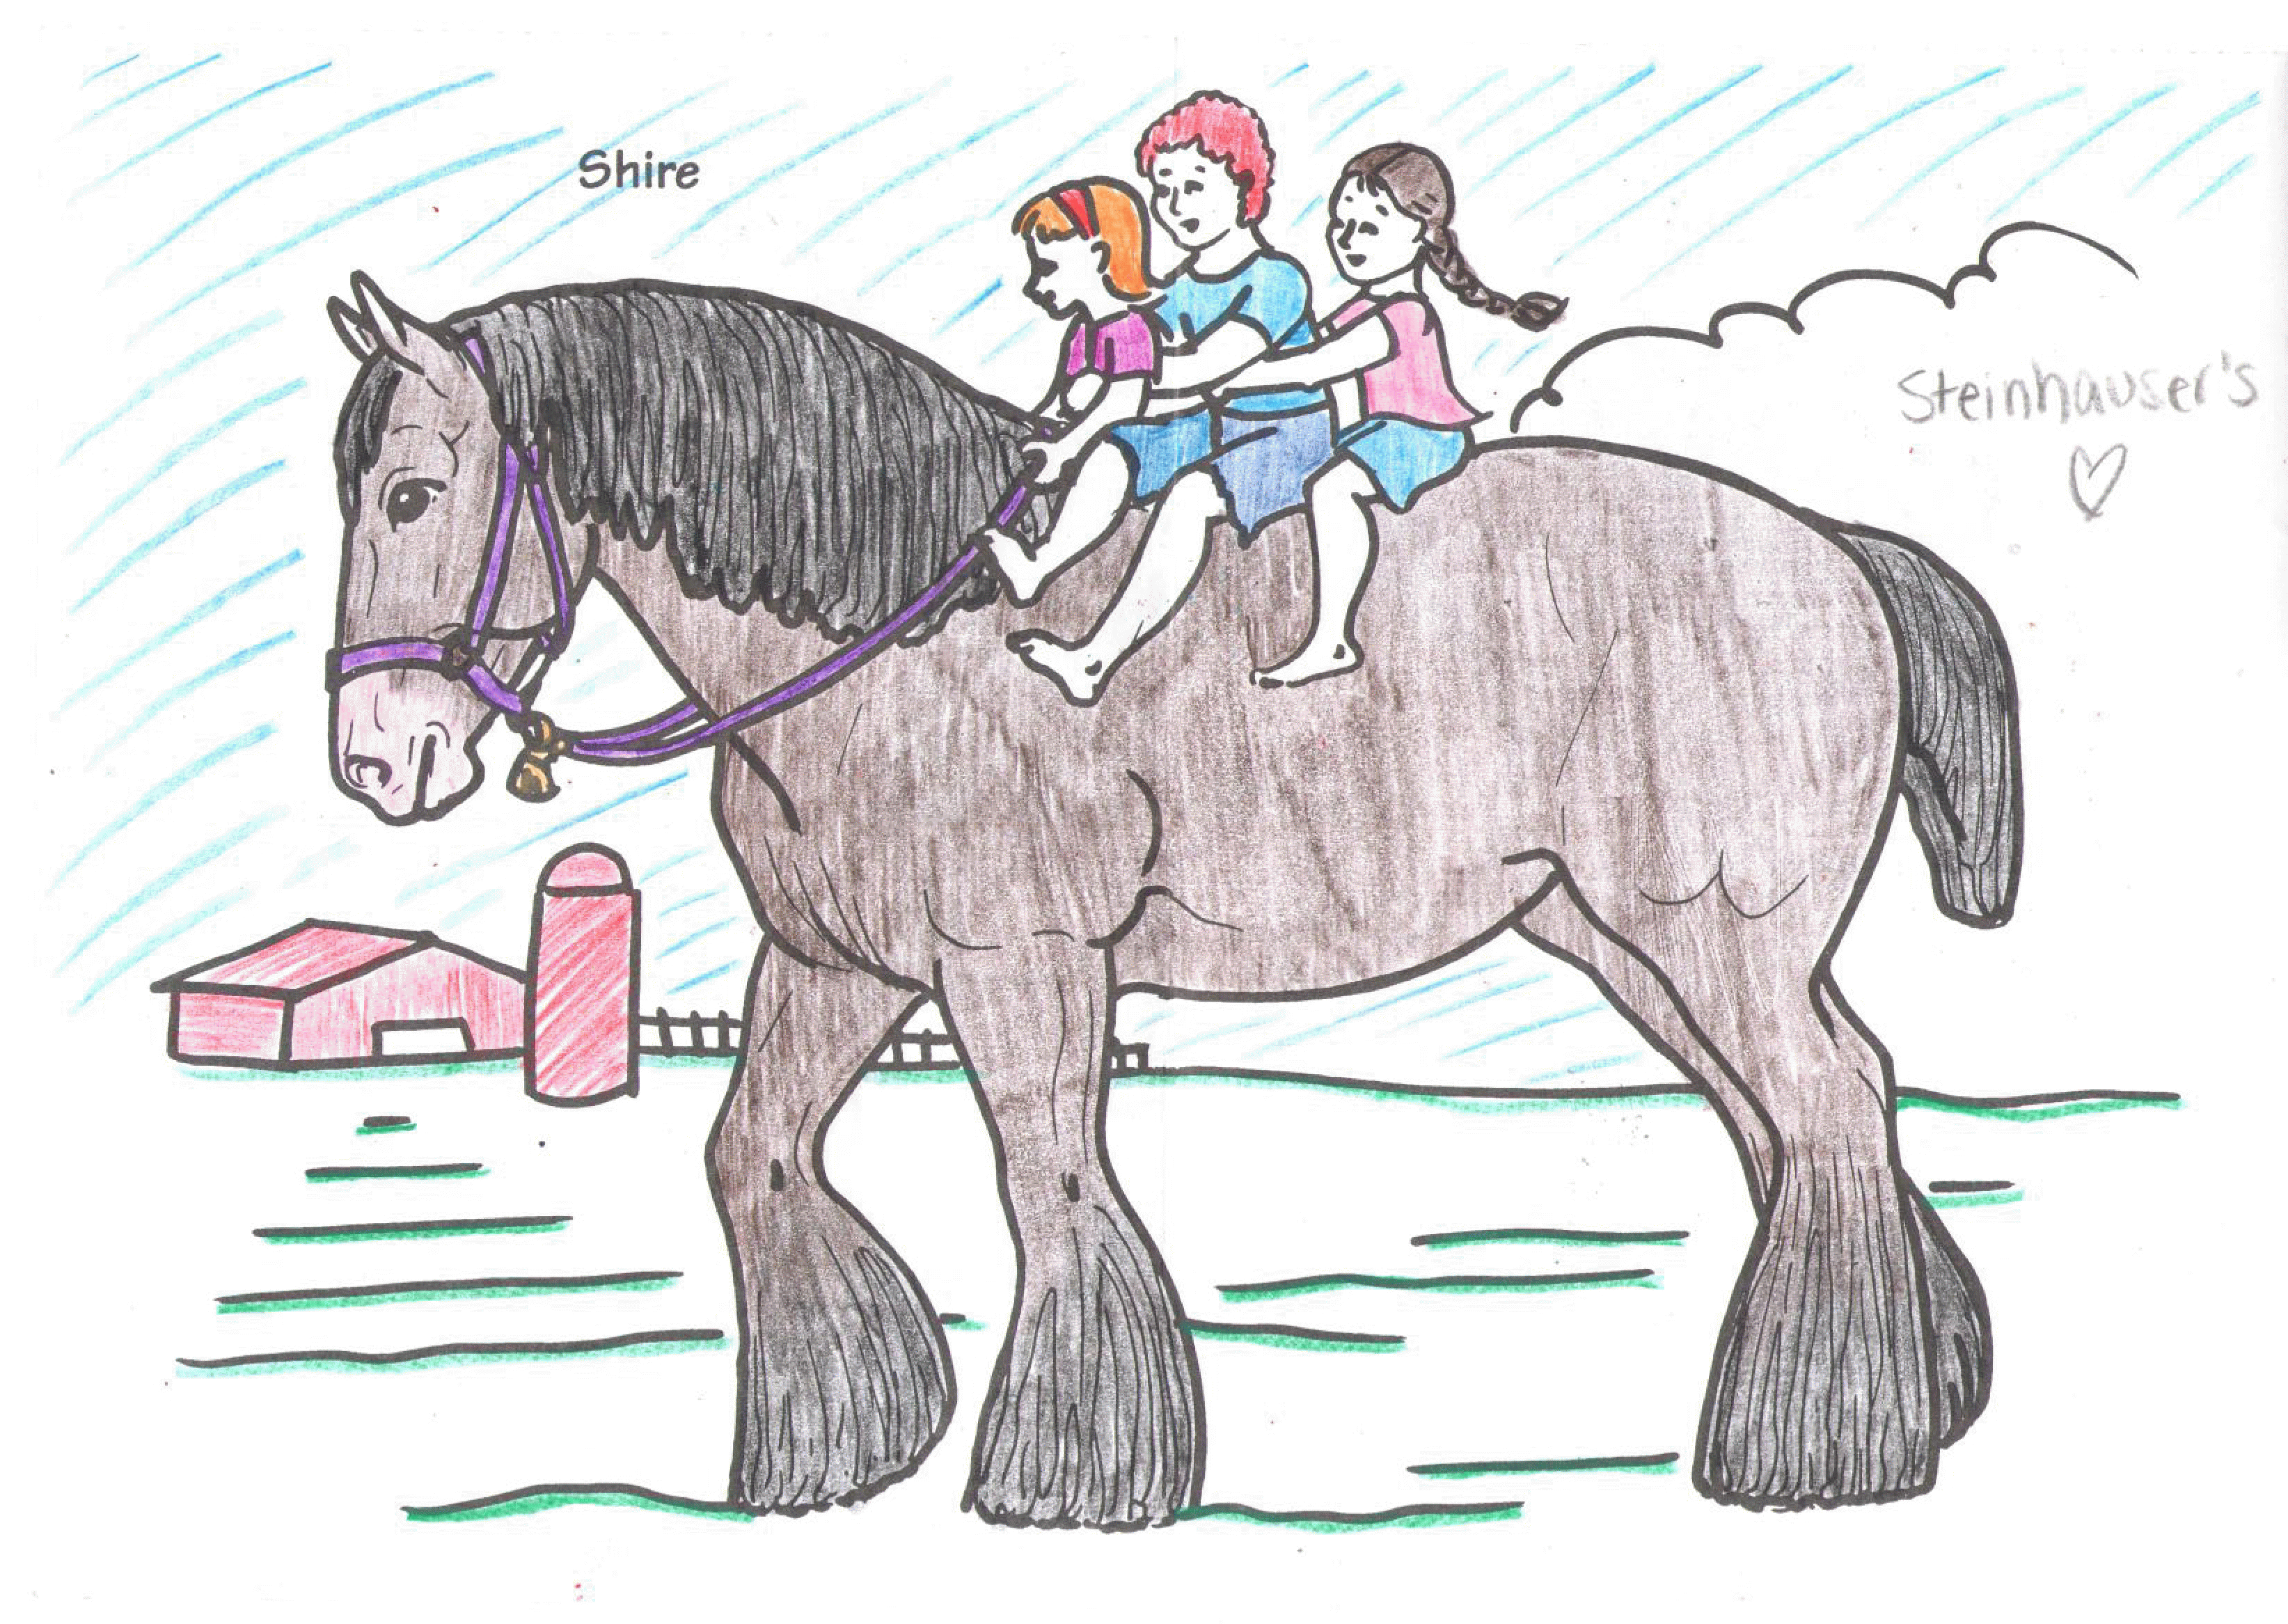 Breyer Coloring Pages - Coloring Home